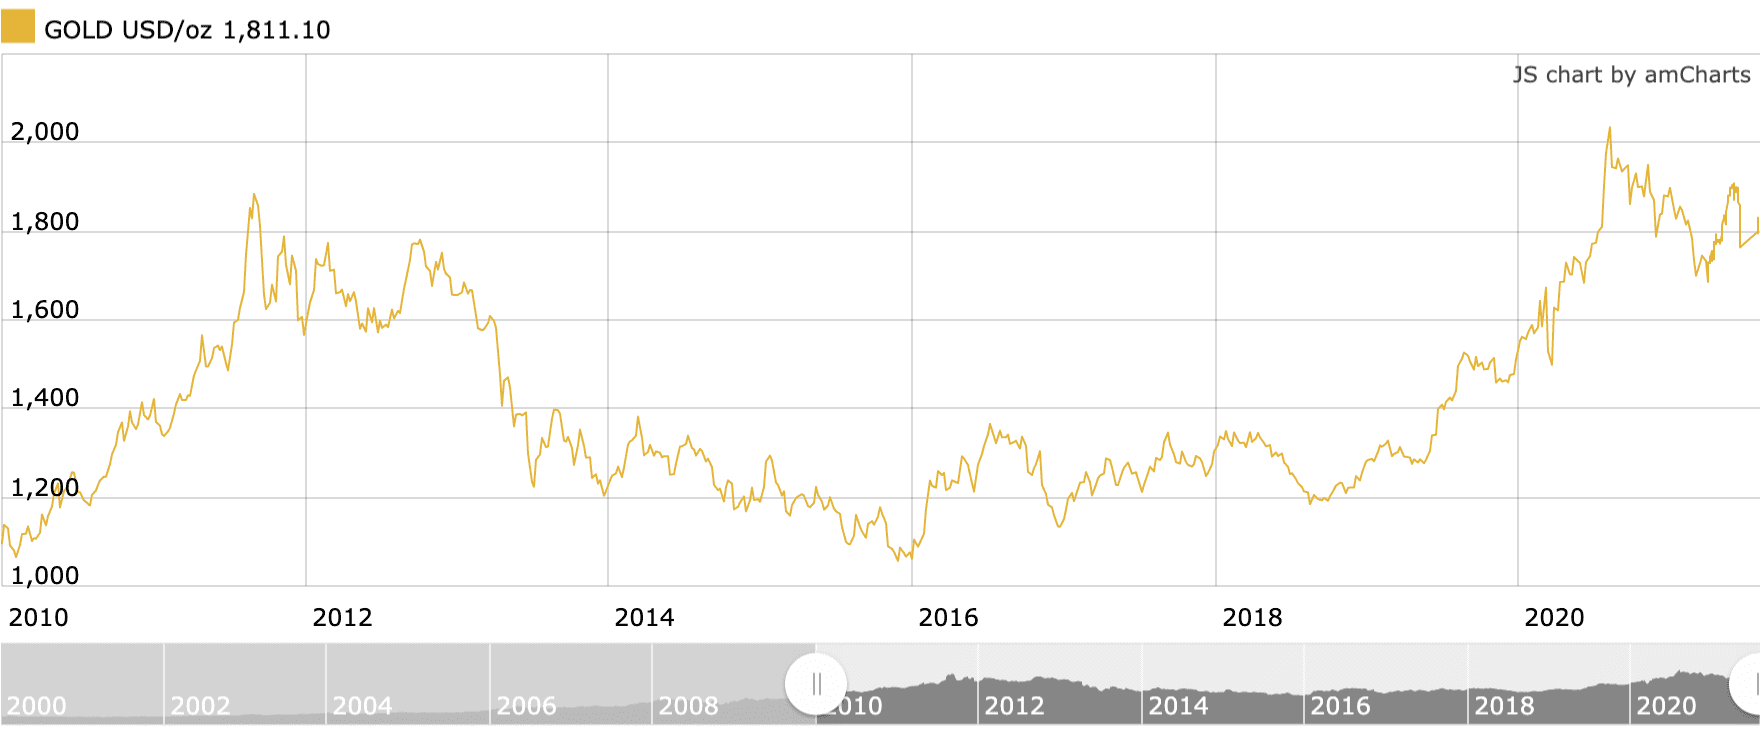 gold price chart, 2010 to mid-2021